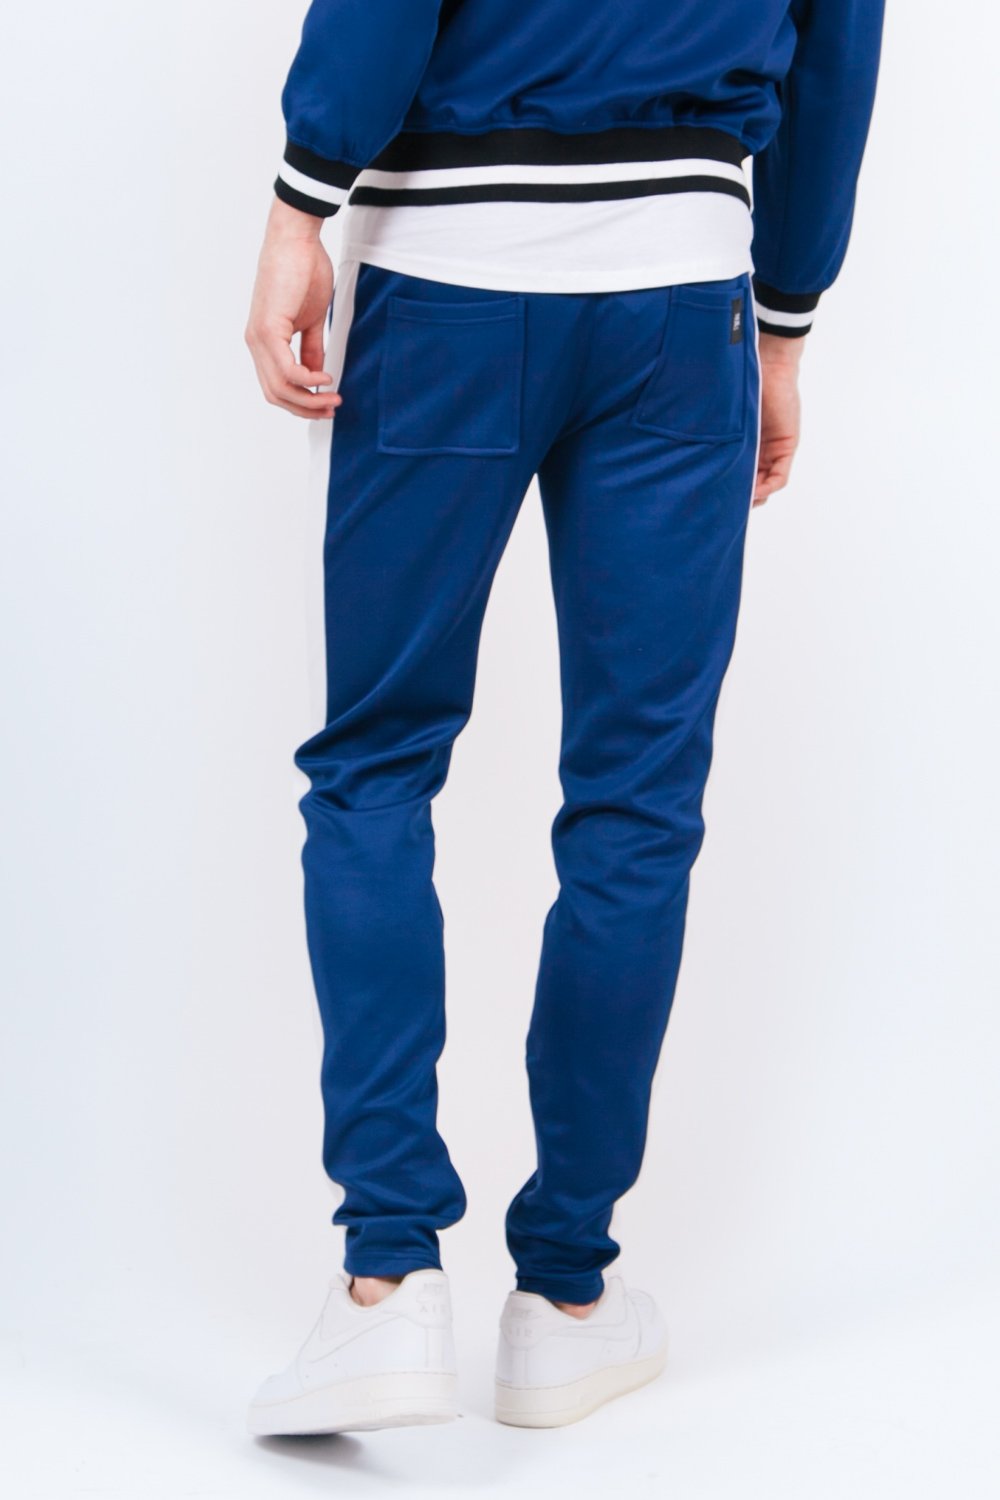 Two Coloured Zips Joggers Blue White